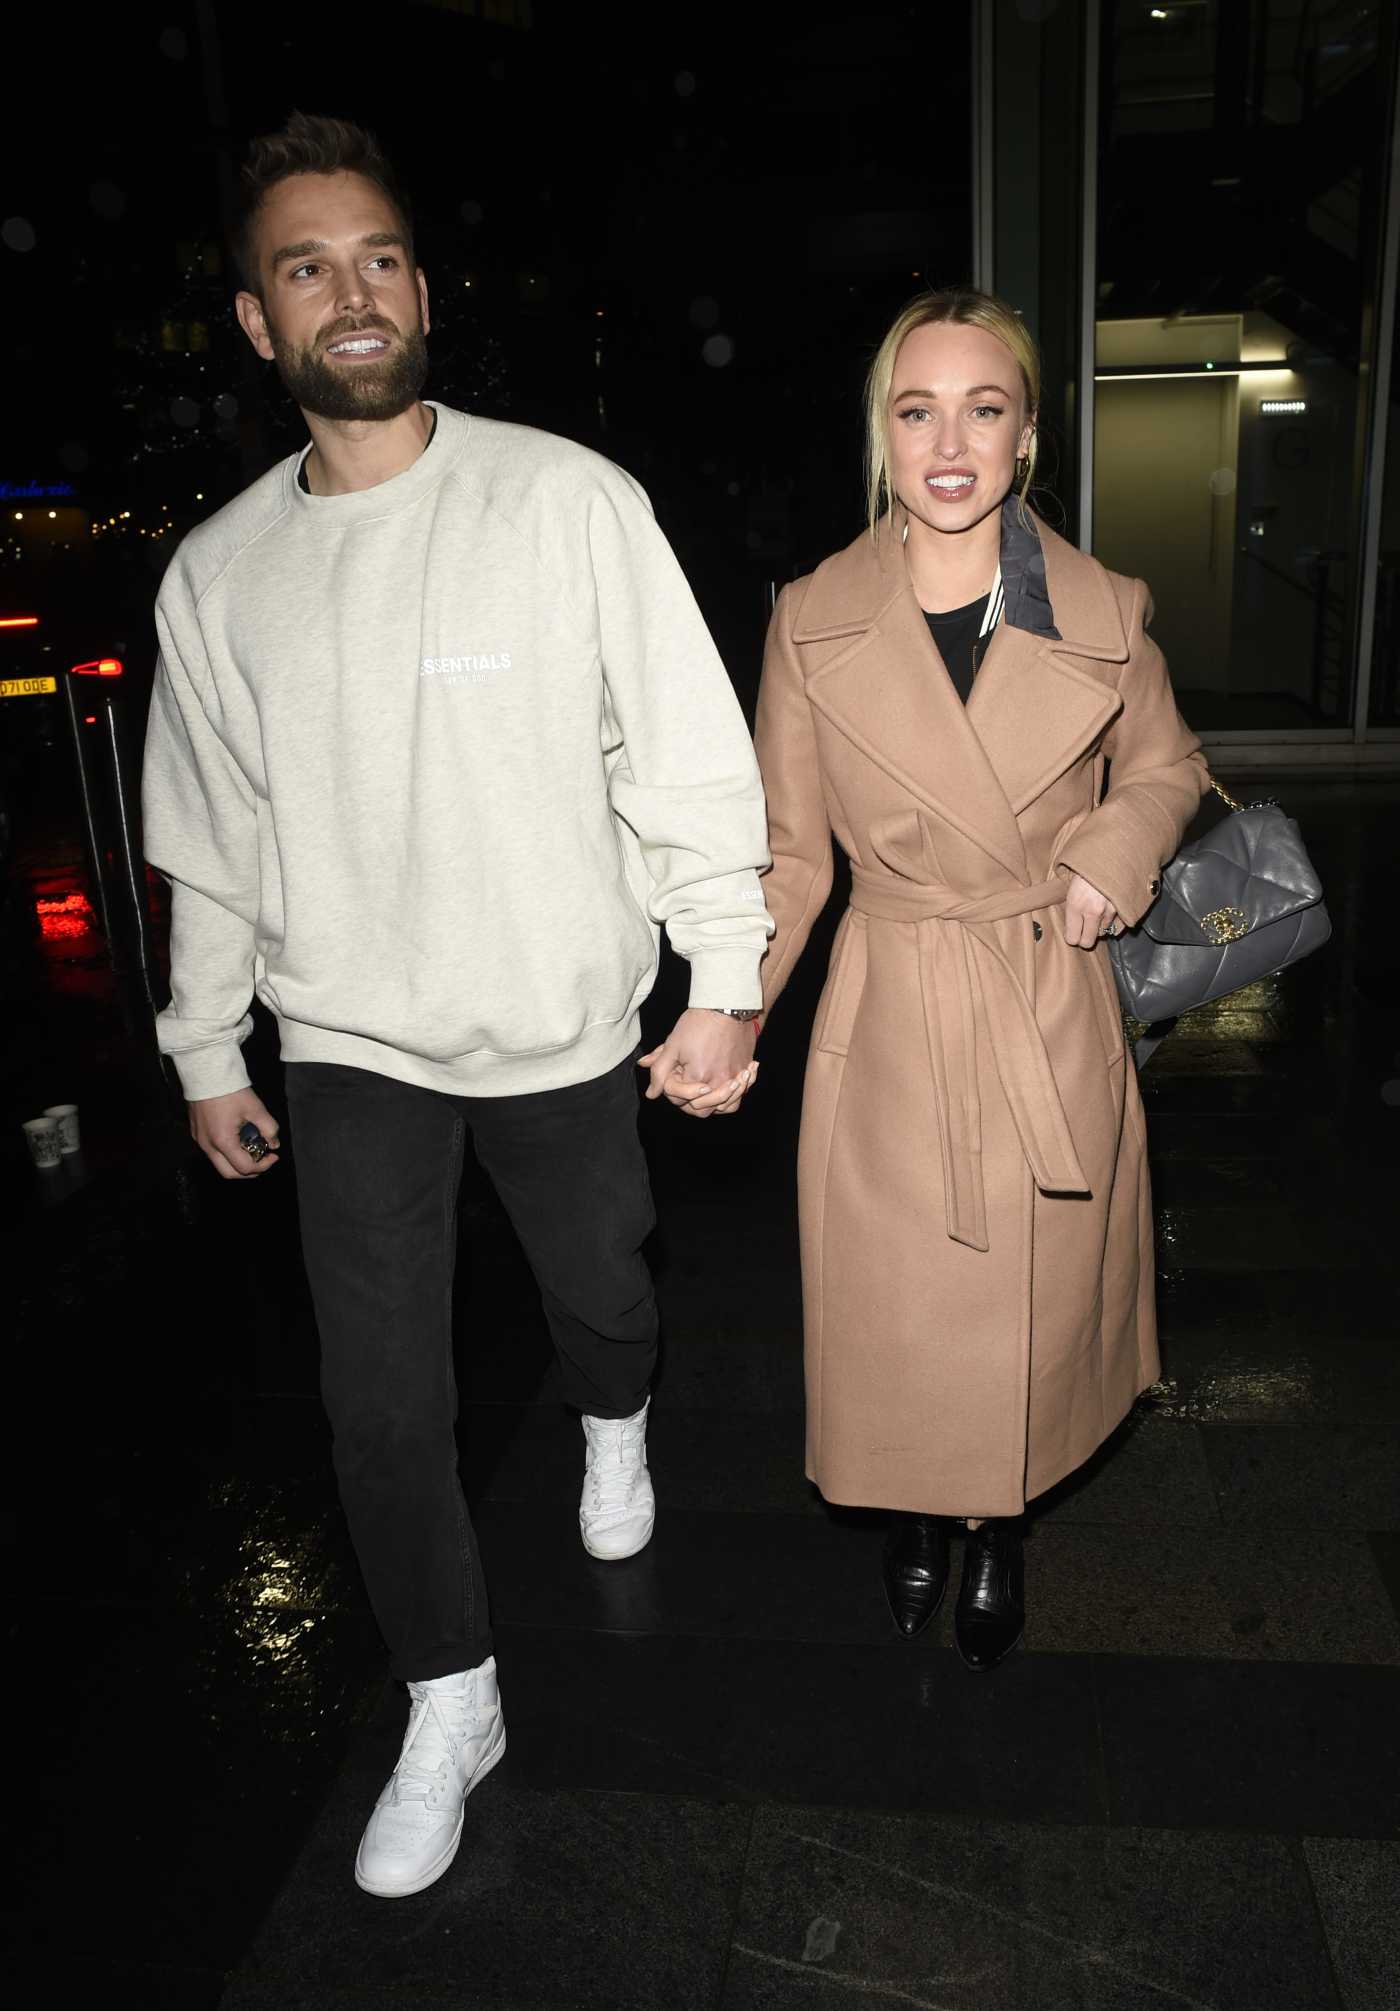 Jorgie Porter in a Beige Coat Enjoys a Date Night at The Ivy Restaurant in Manchester 02/13/2022